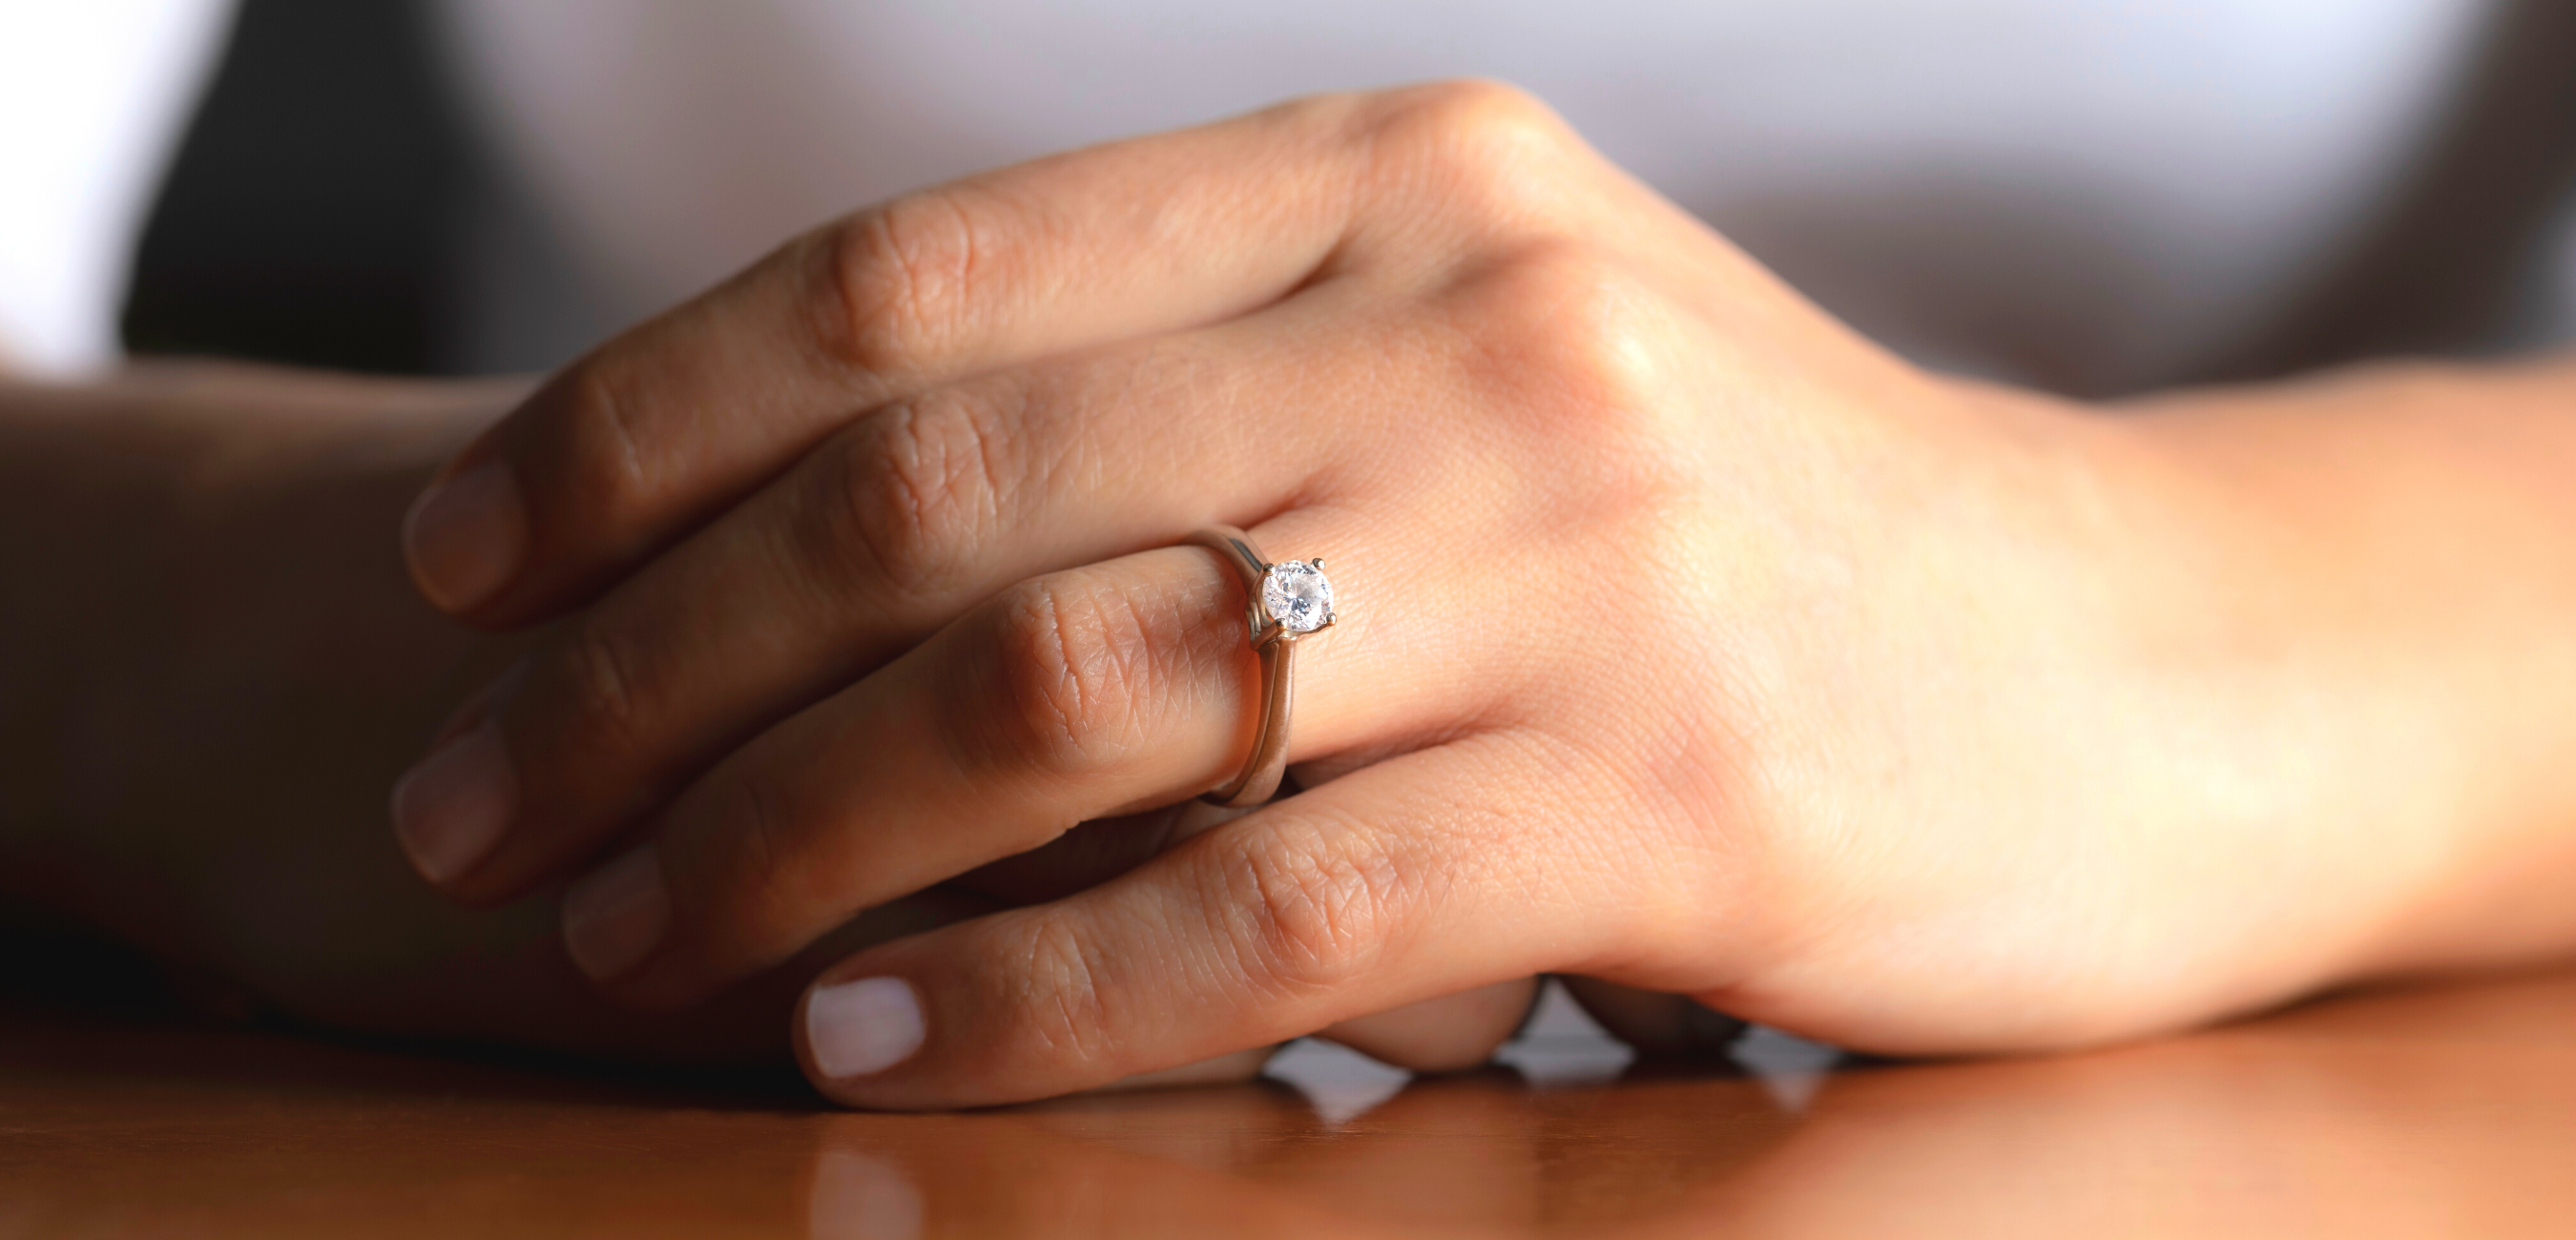 Engagement solitaire diamond ring